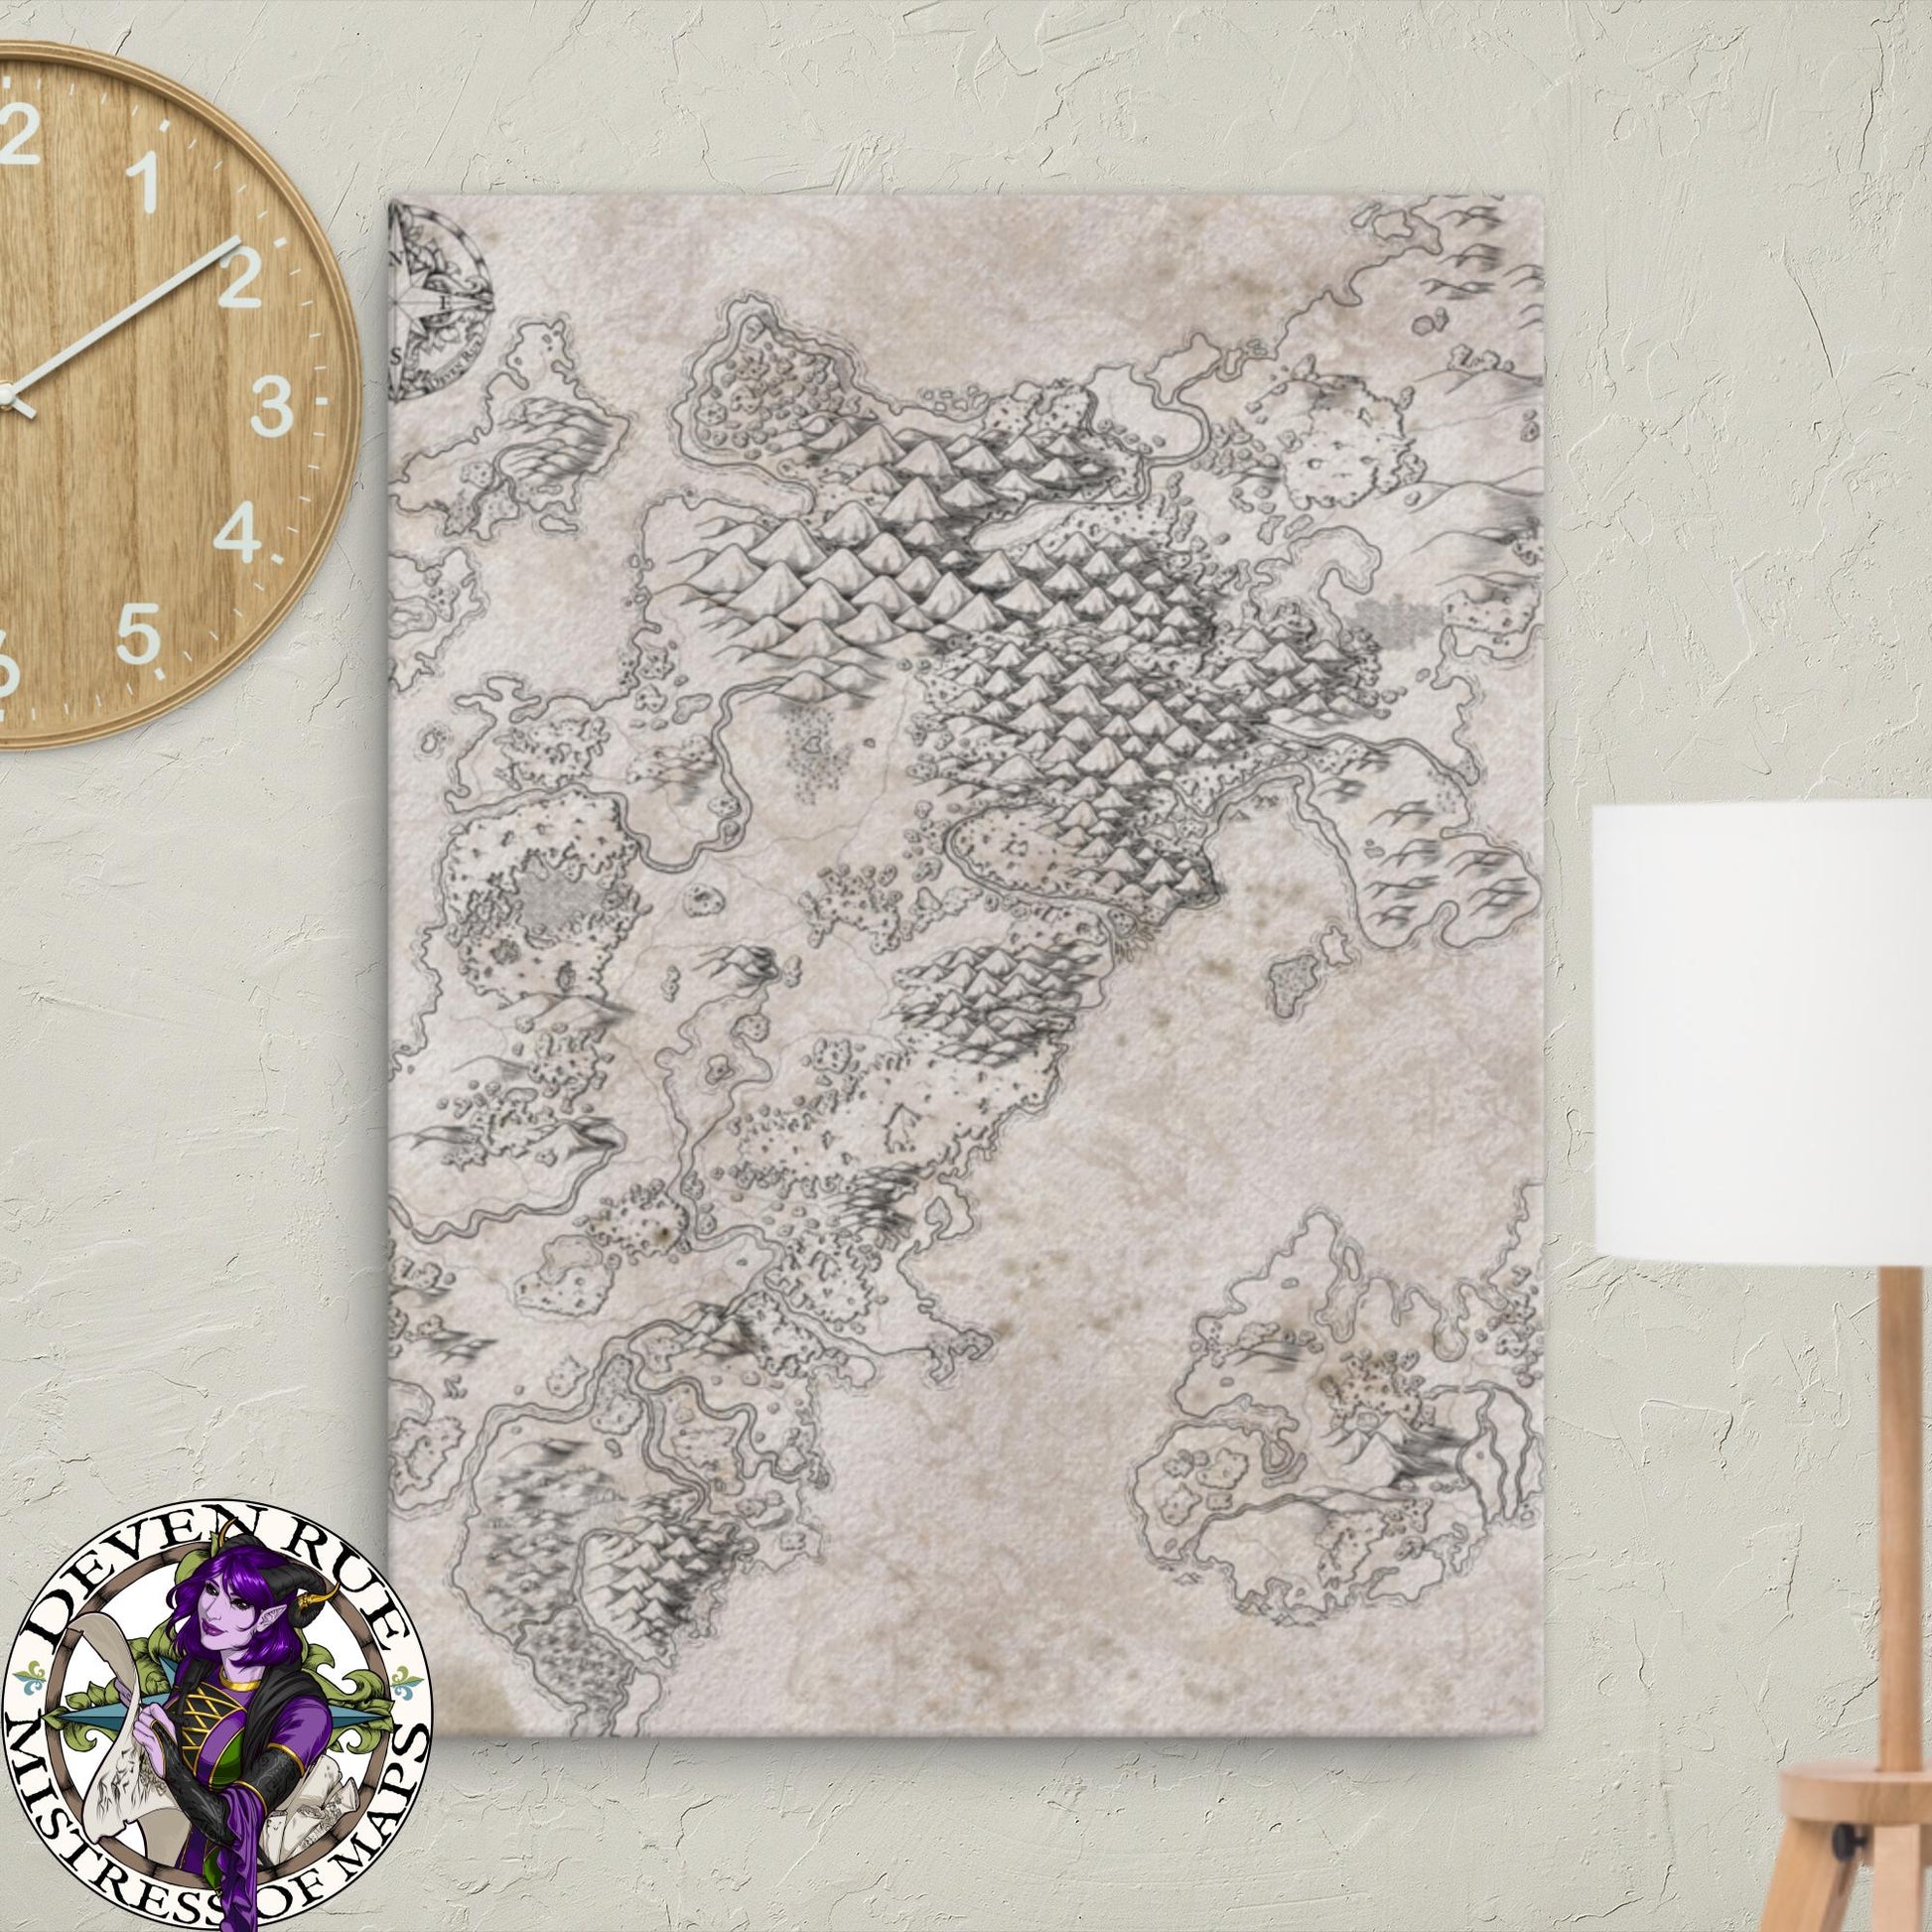 A 18" by 24" canvas print of the Wallerfen map by Deven Rue hangs on a wall between a lamp and a clock.